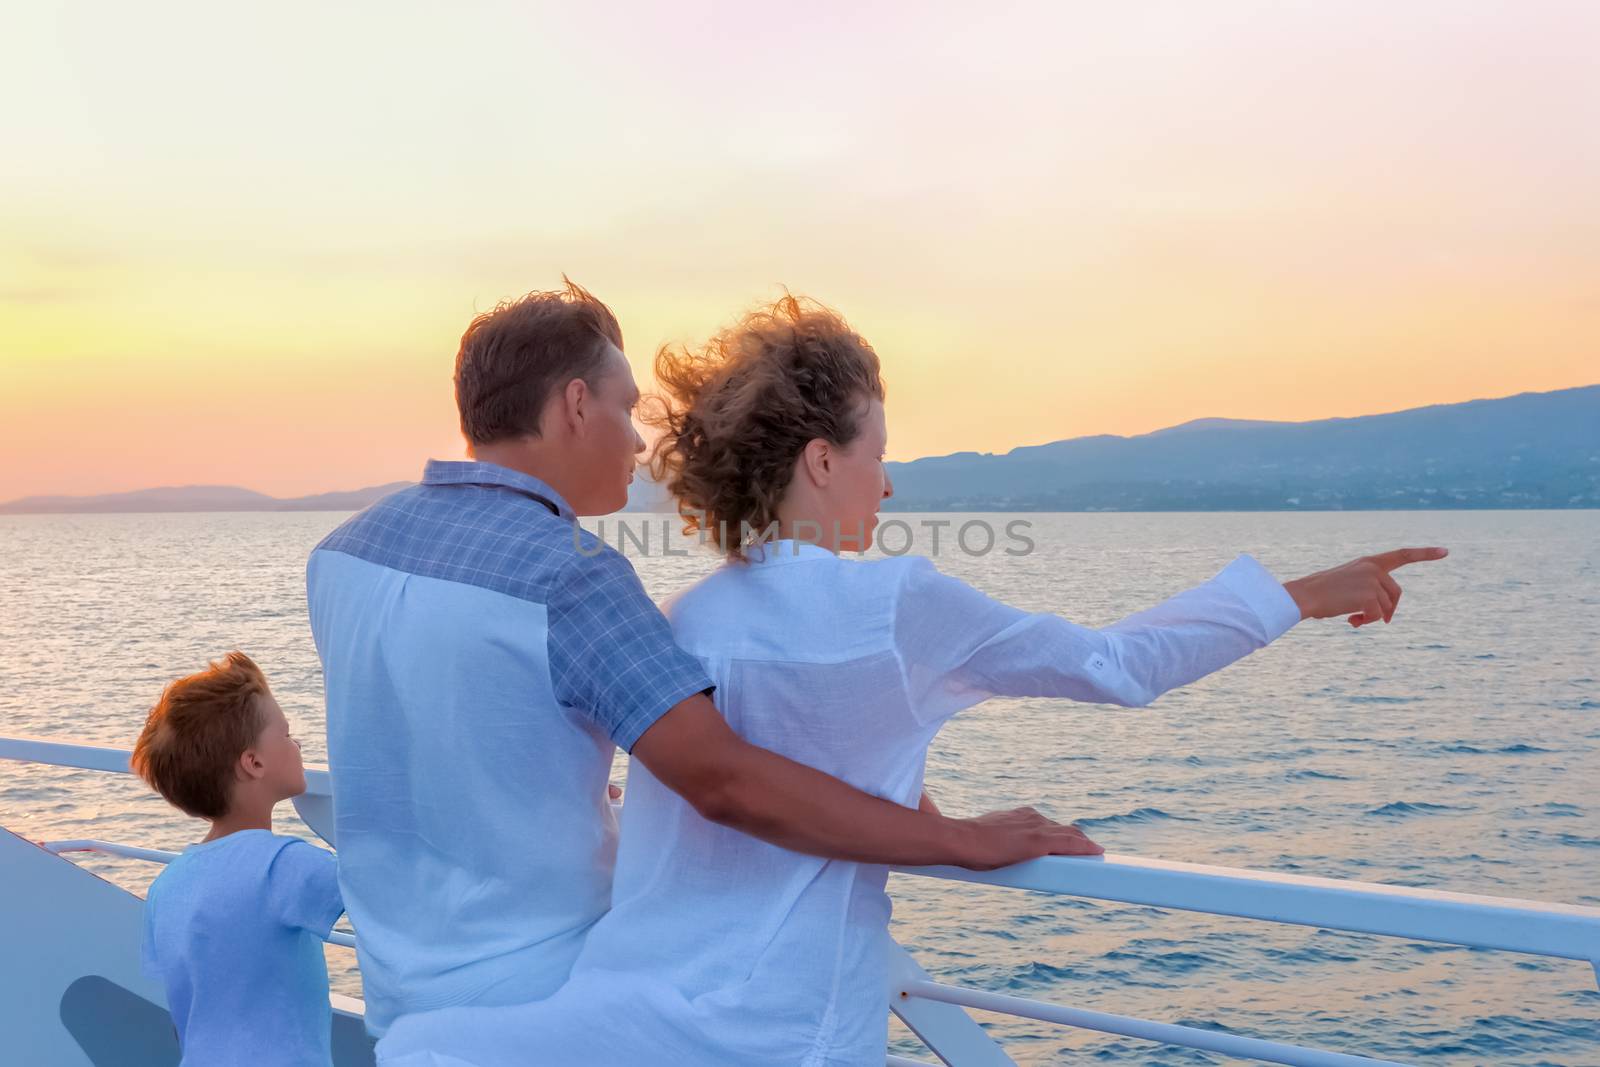 Family with one child. High season vacation. Christmas vacation concept. Positive emotions. Happy family traveling on sea transport. Love and support in family. Warm relationships by synel